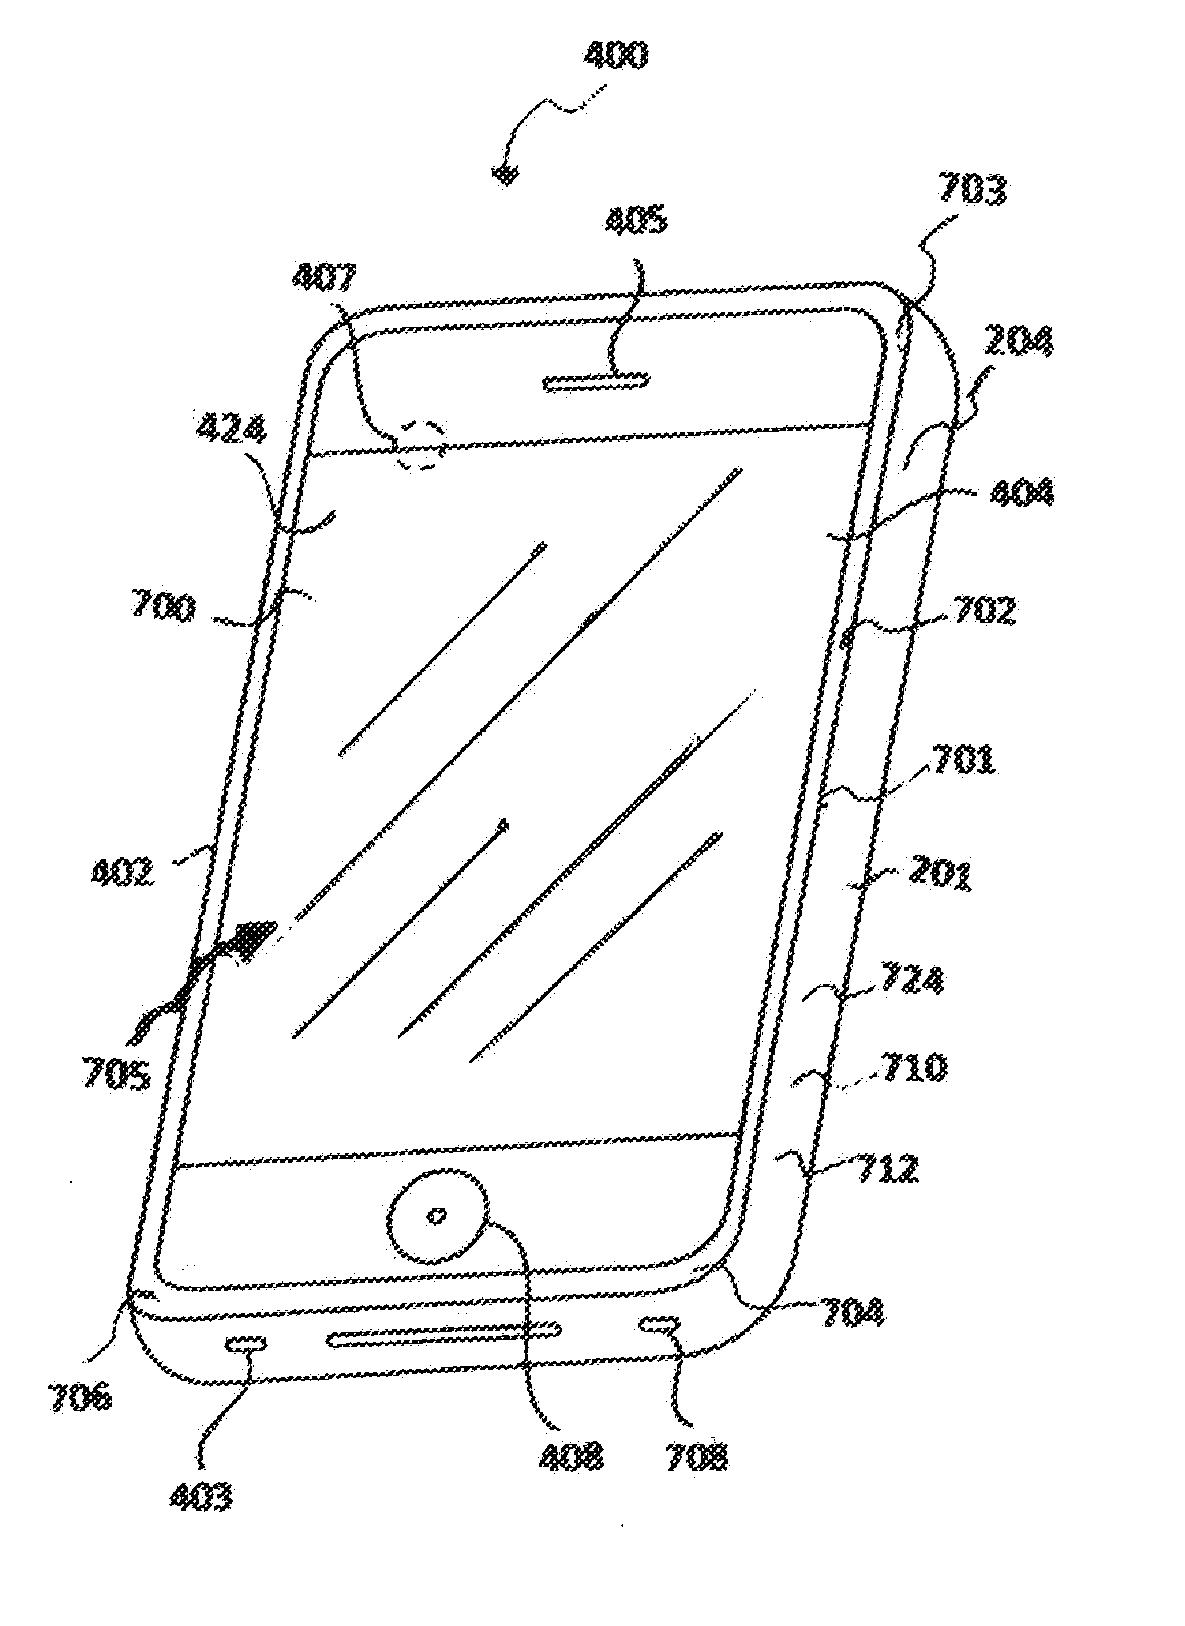 Mega communication and media apparatus configured to provide faster data transmission speed and to generate electrical energy